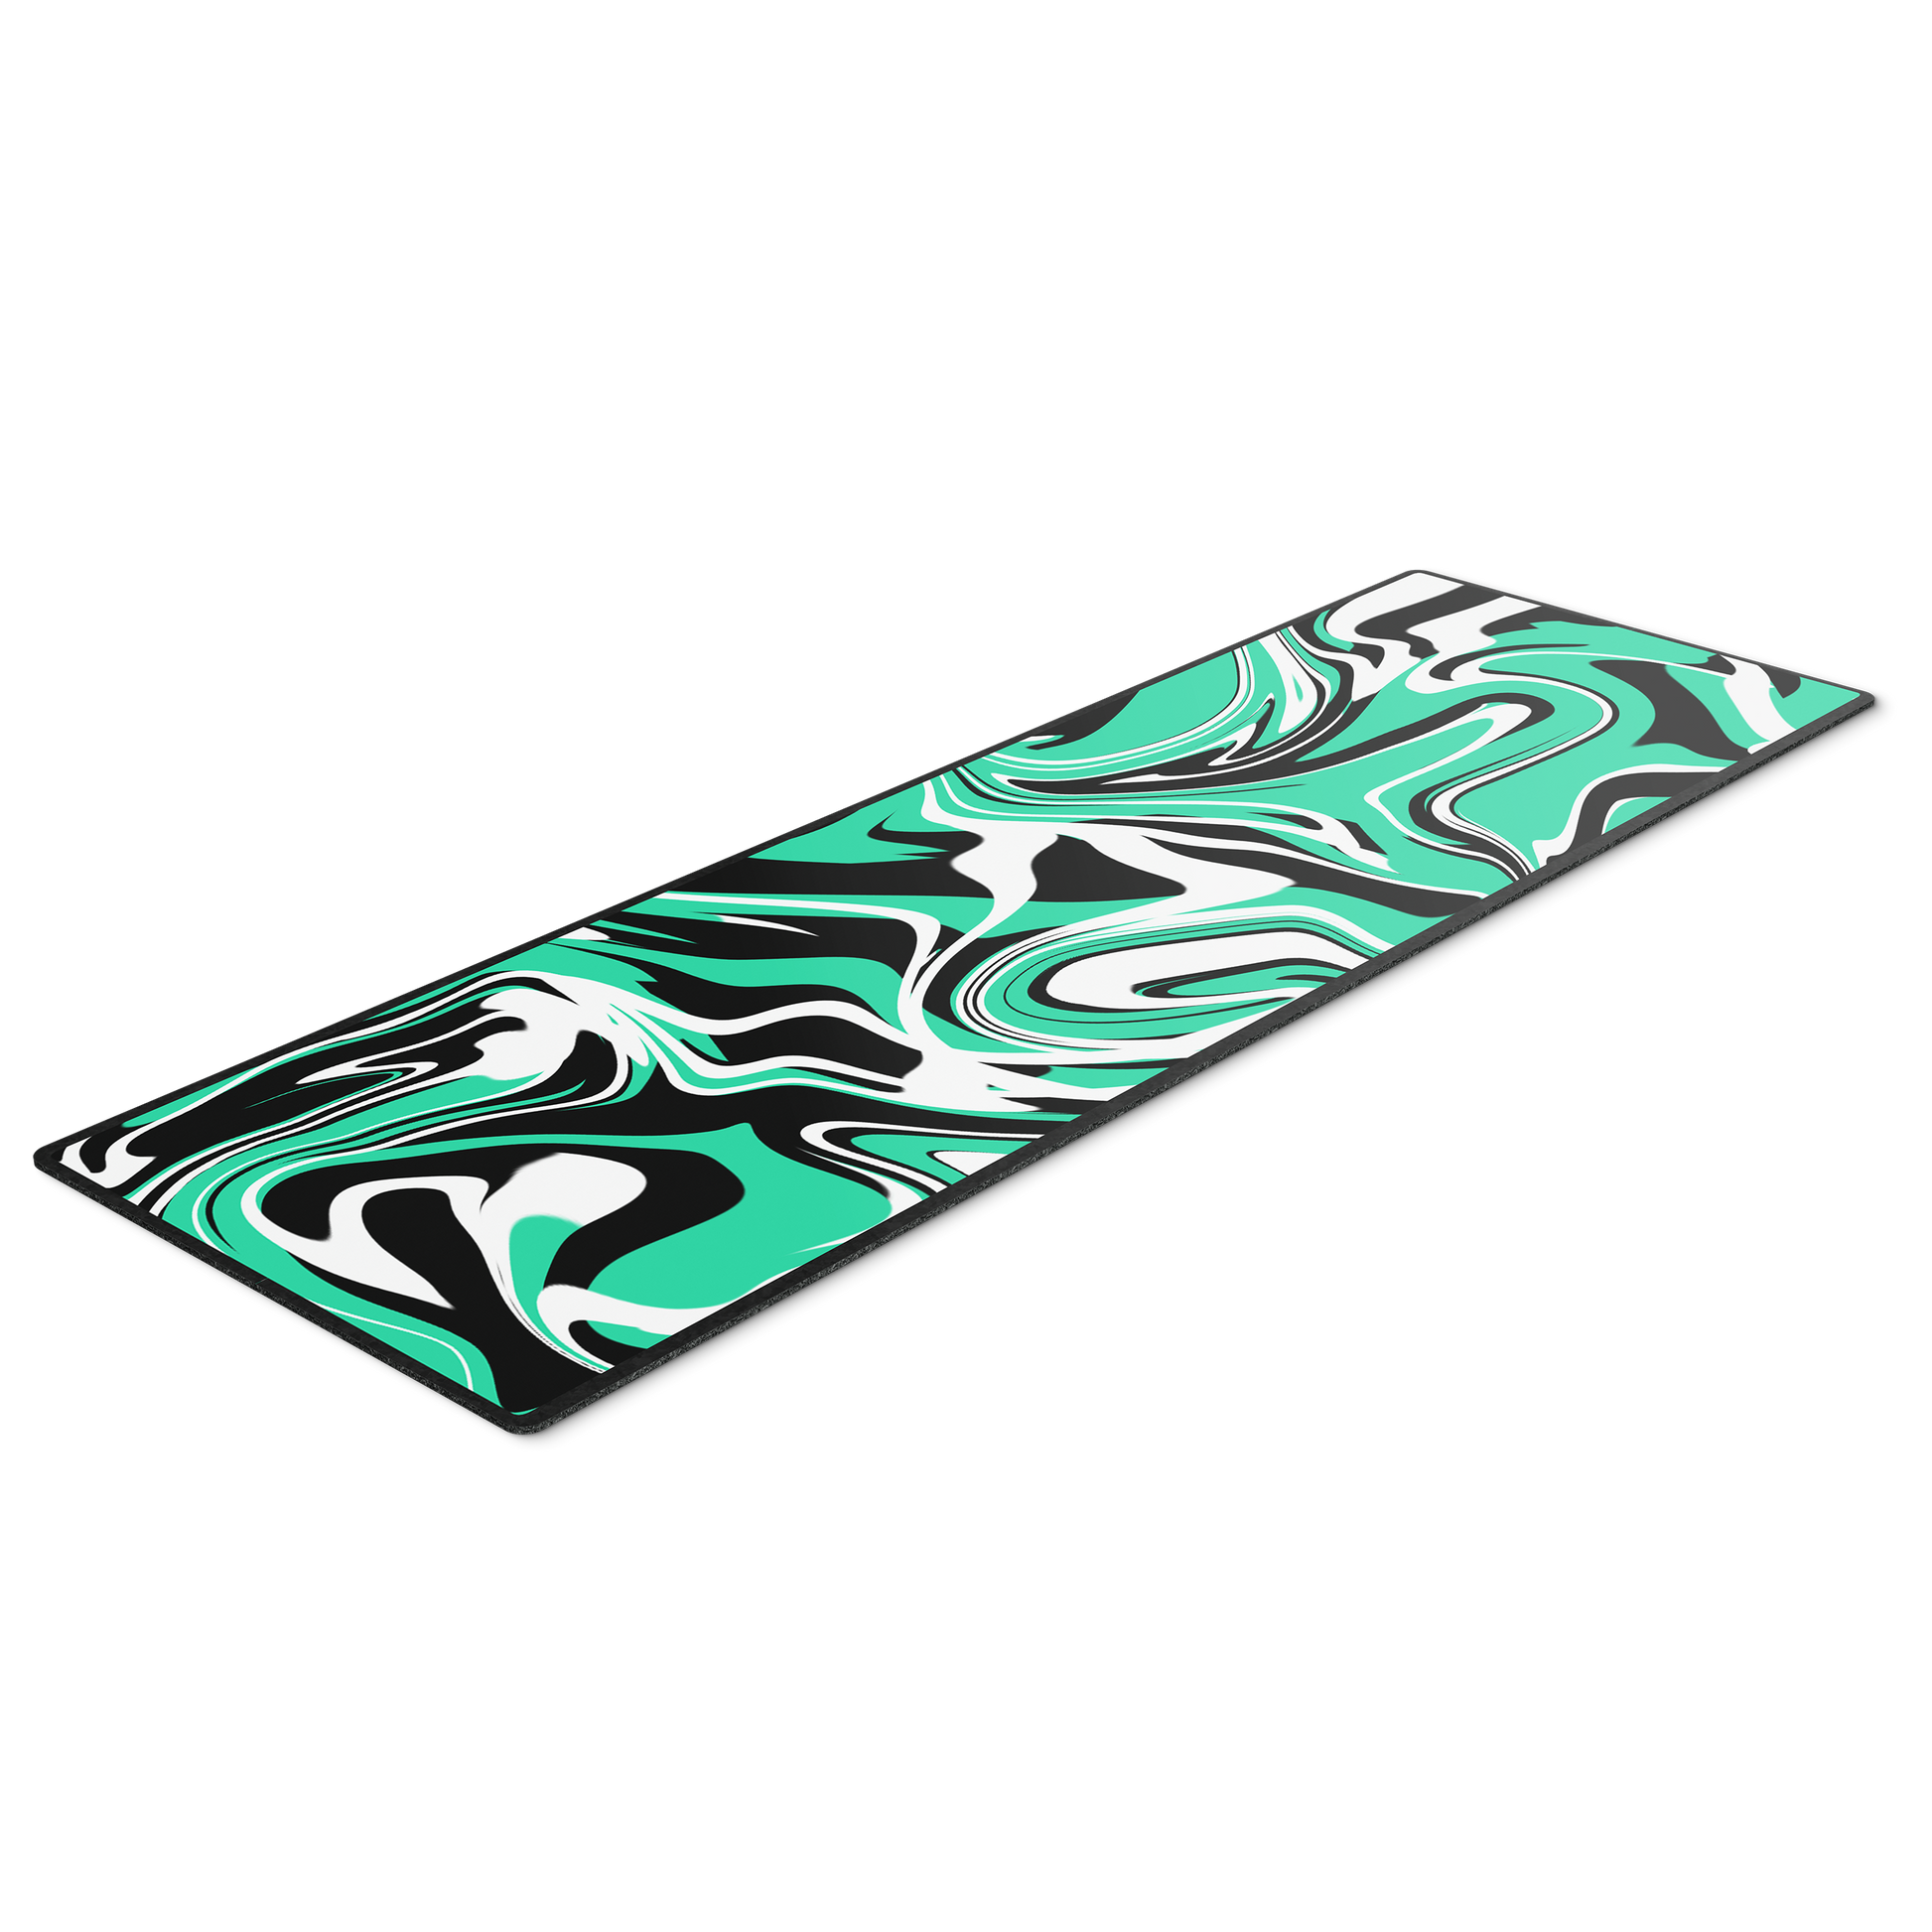 Mint Ice Cream XL Gaming Mouse Mat